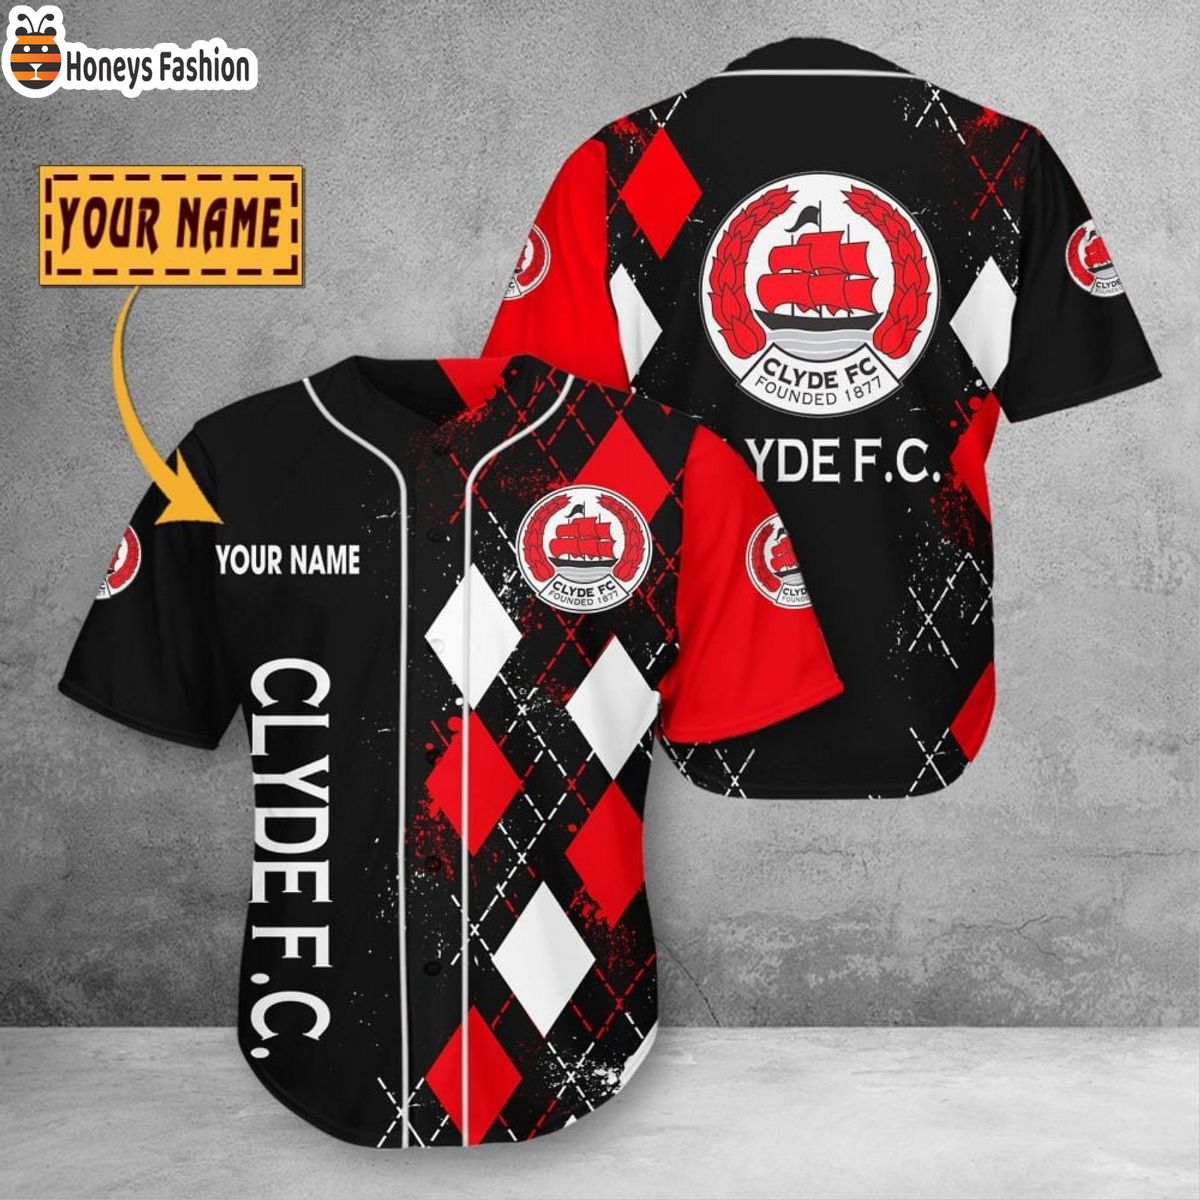 Personalized Clyde F.C. Baseball Jersey